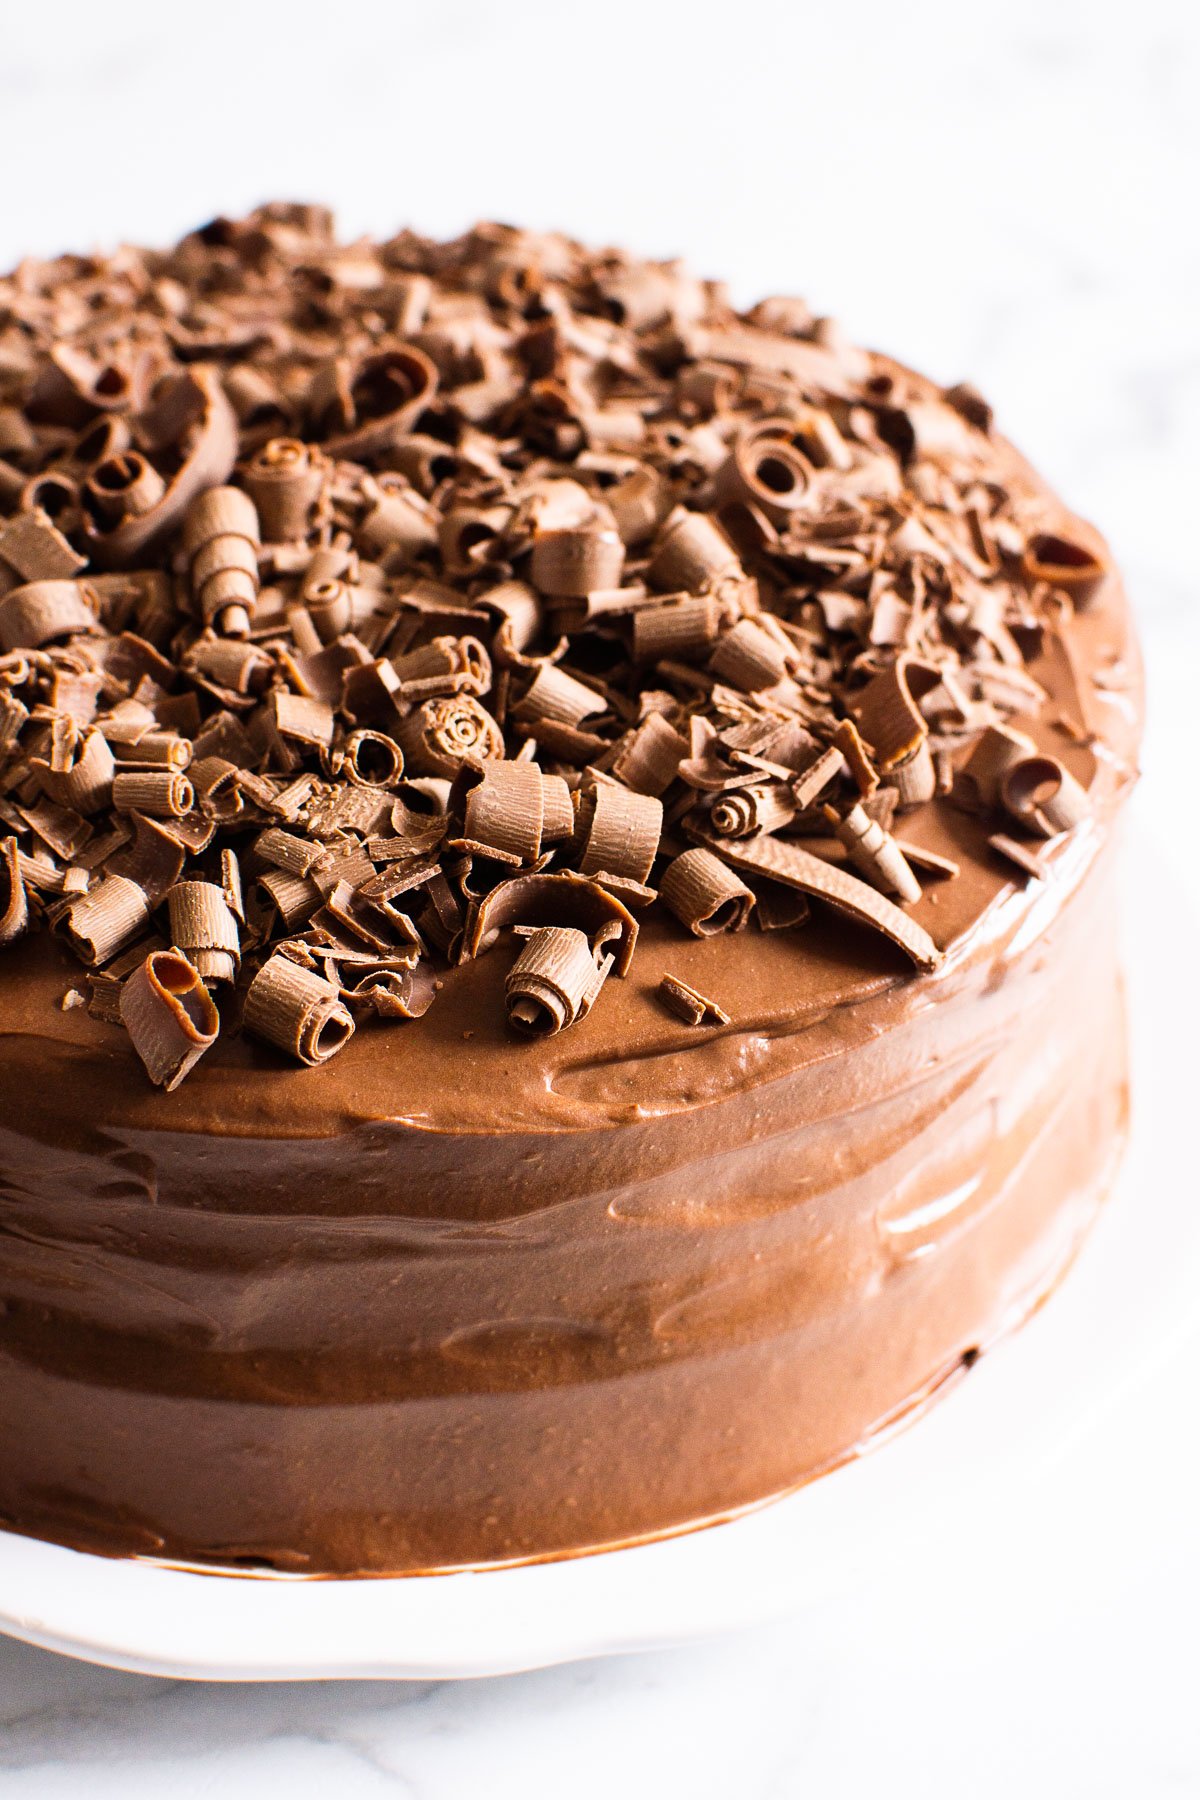 healthy chocolate cake with chocolate shavings on top